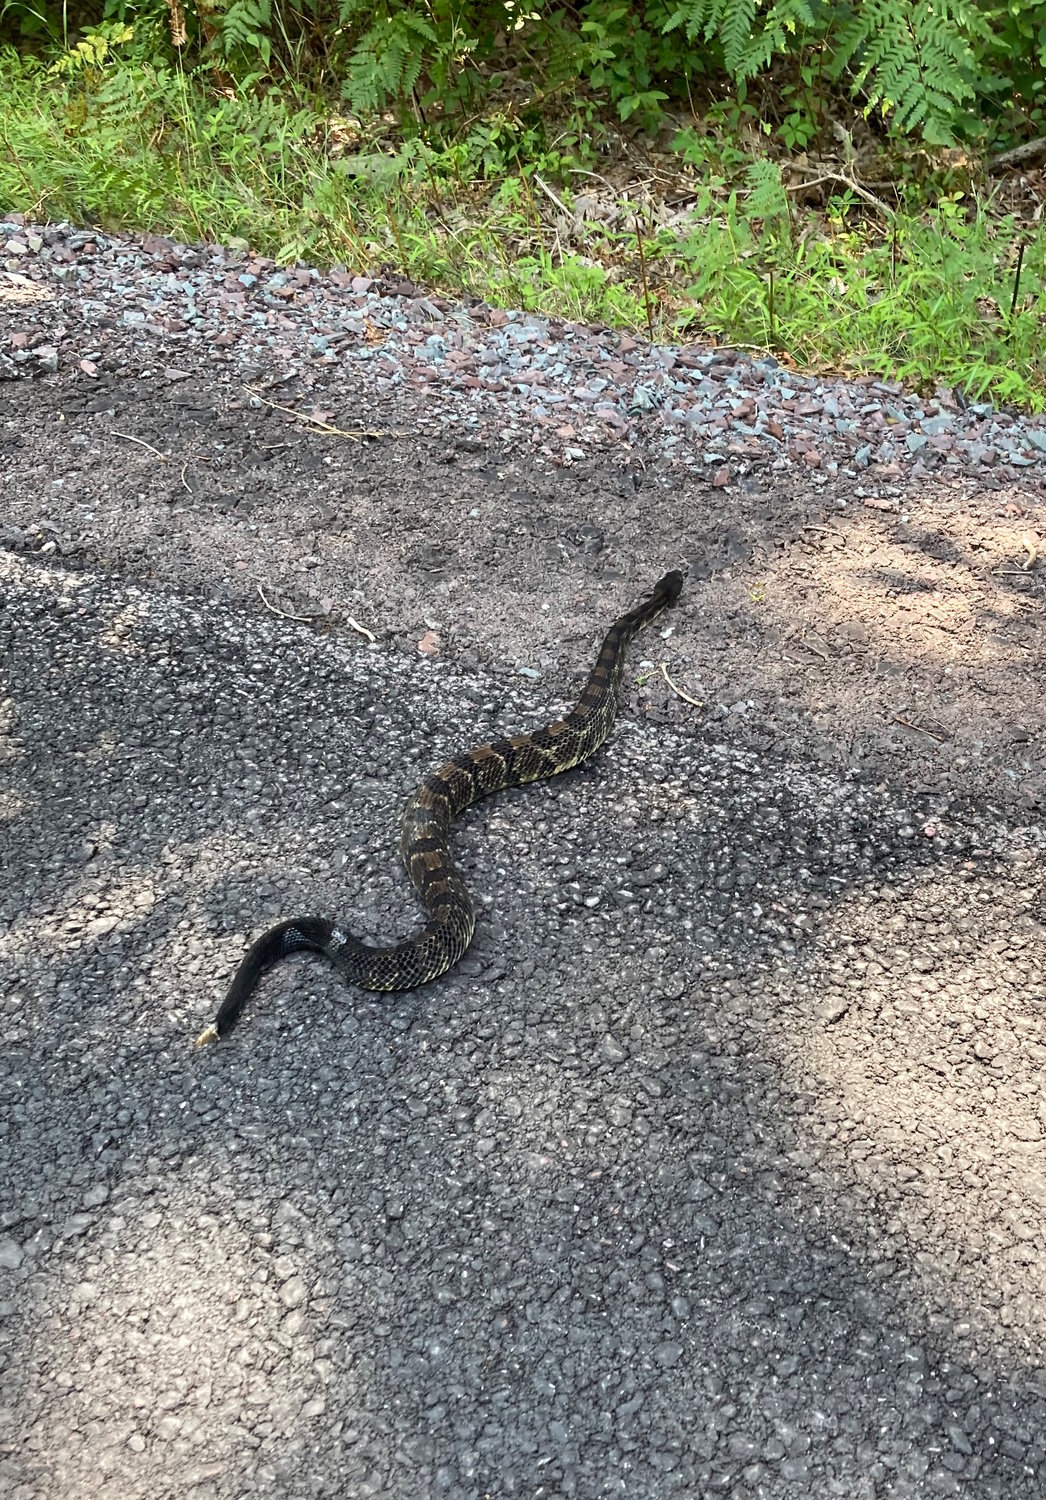 Timber rattlesnakes are on the move throughout the Upper Delaware River region now. We encountered this one crossing a Pike County roadway. With the aid of a long branch and some gentle prodding, the snake was urged to safety in the direction it was heading. Keep watch for all species attempting to cross roads during these peak summer days.